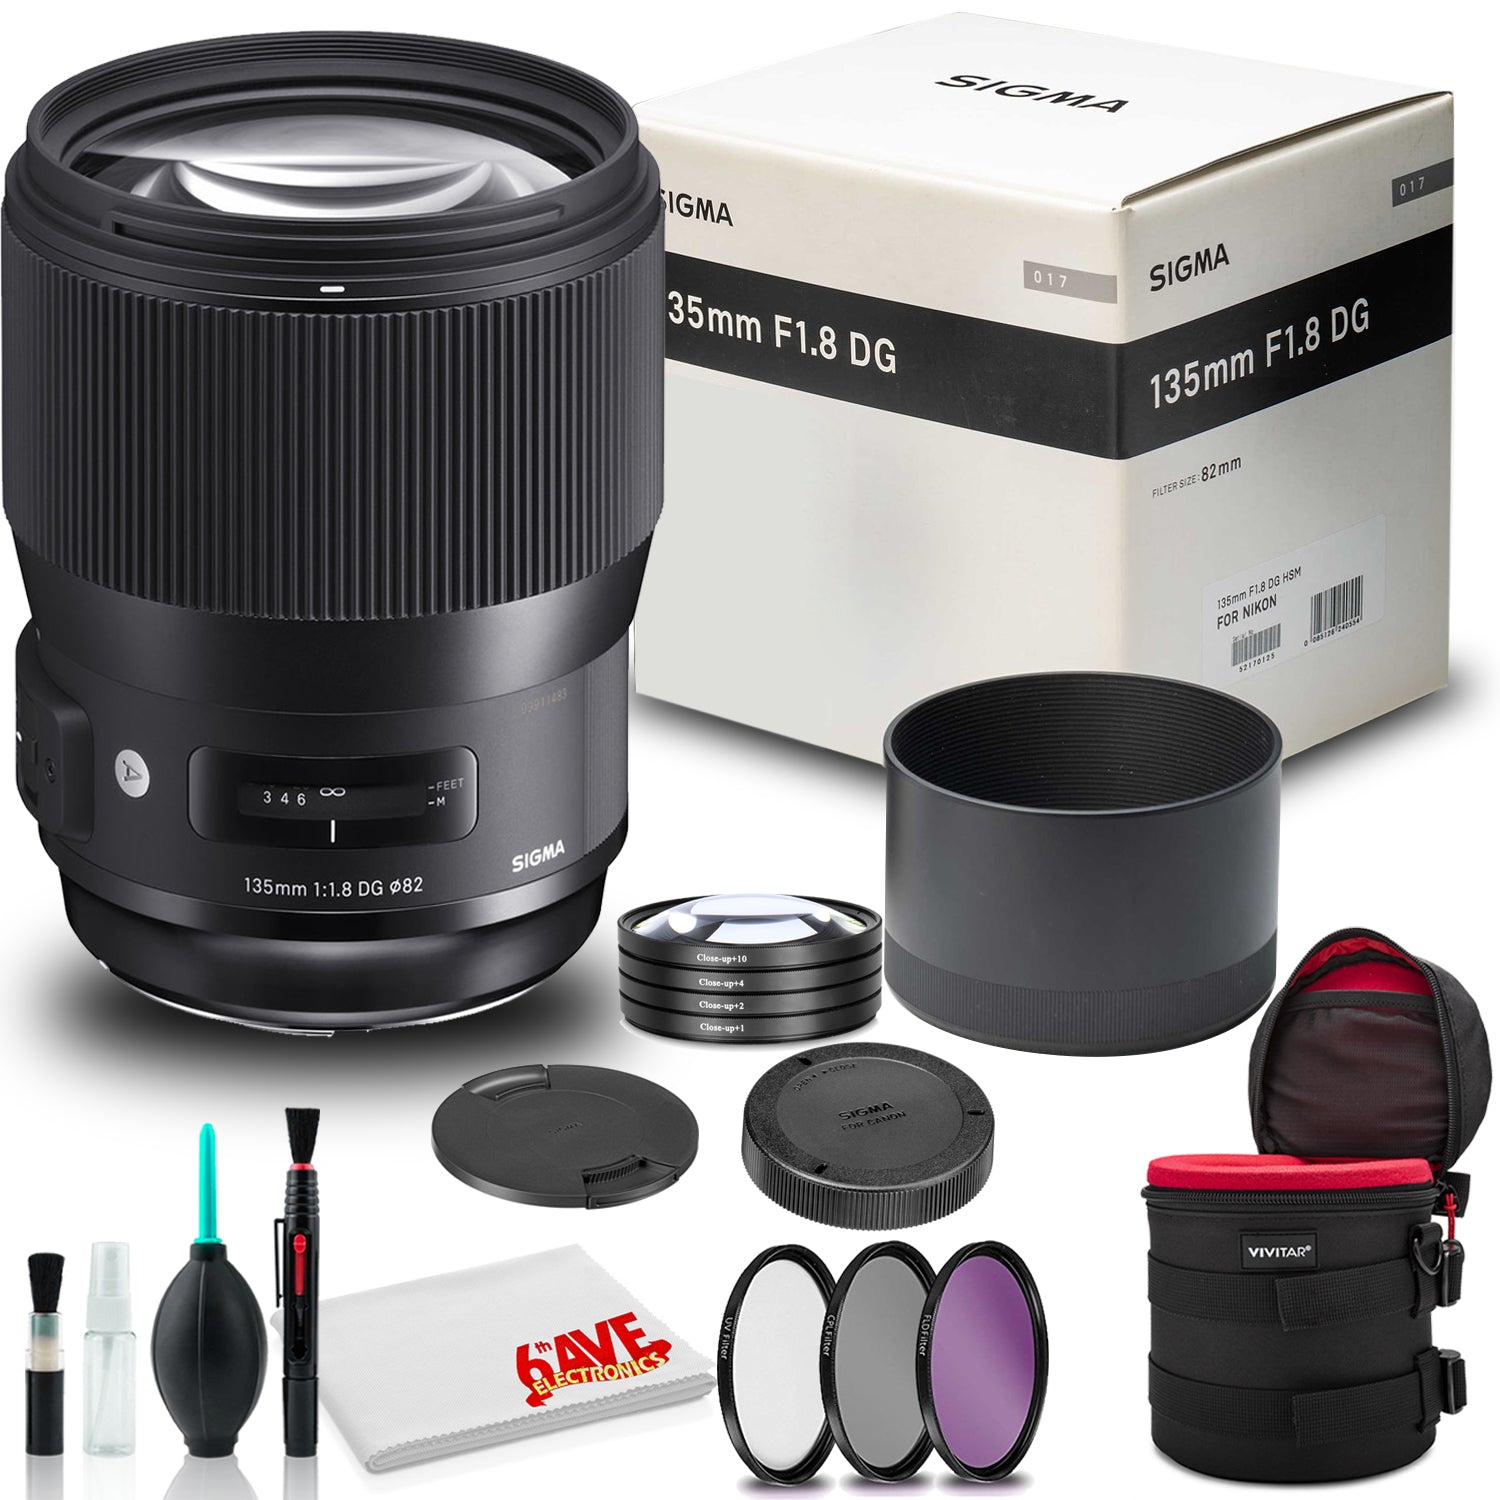 Sigma 135mm f/1.8 DG HSM Art Lens for Nikon F With Cleaning Kit and Lens Case Bundle